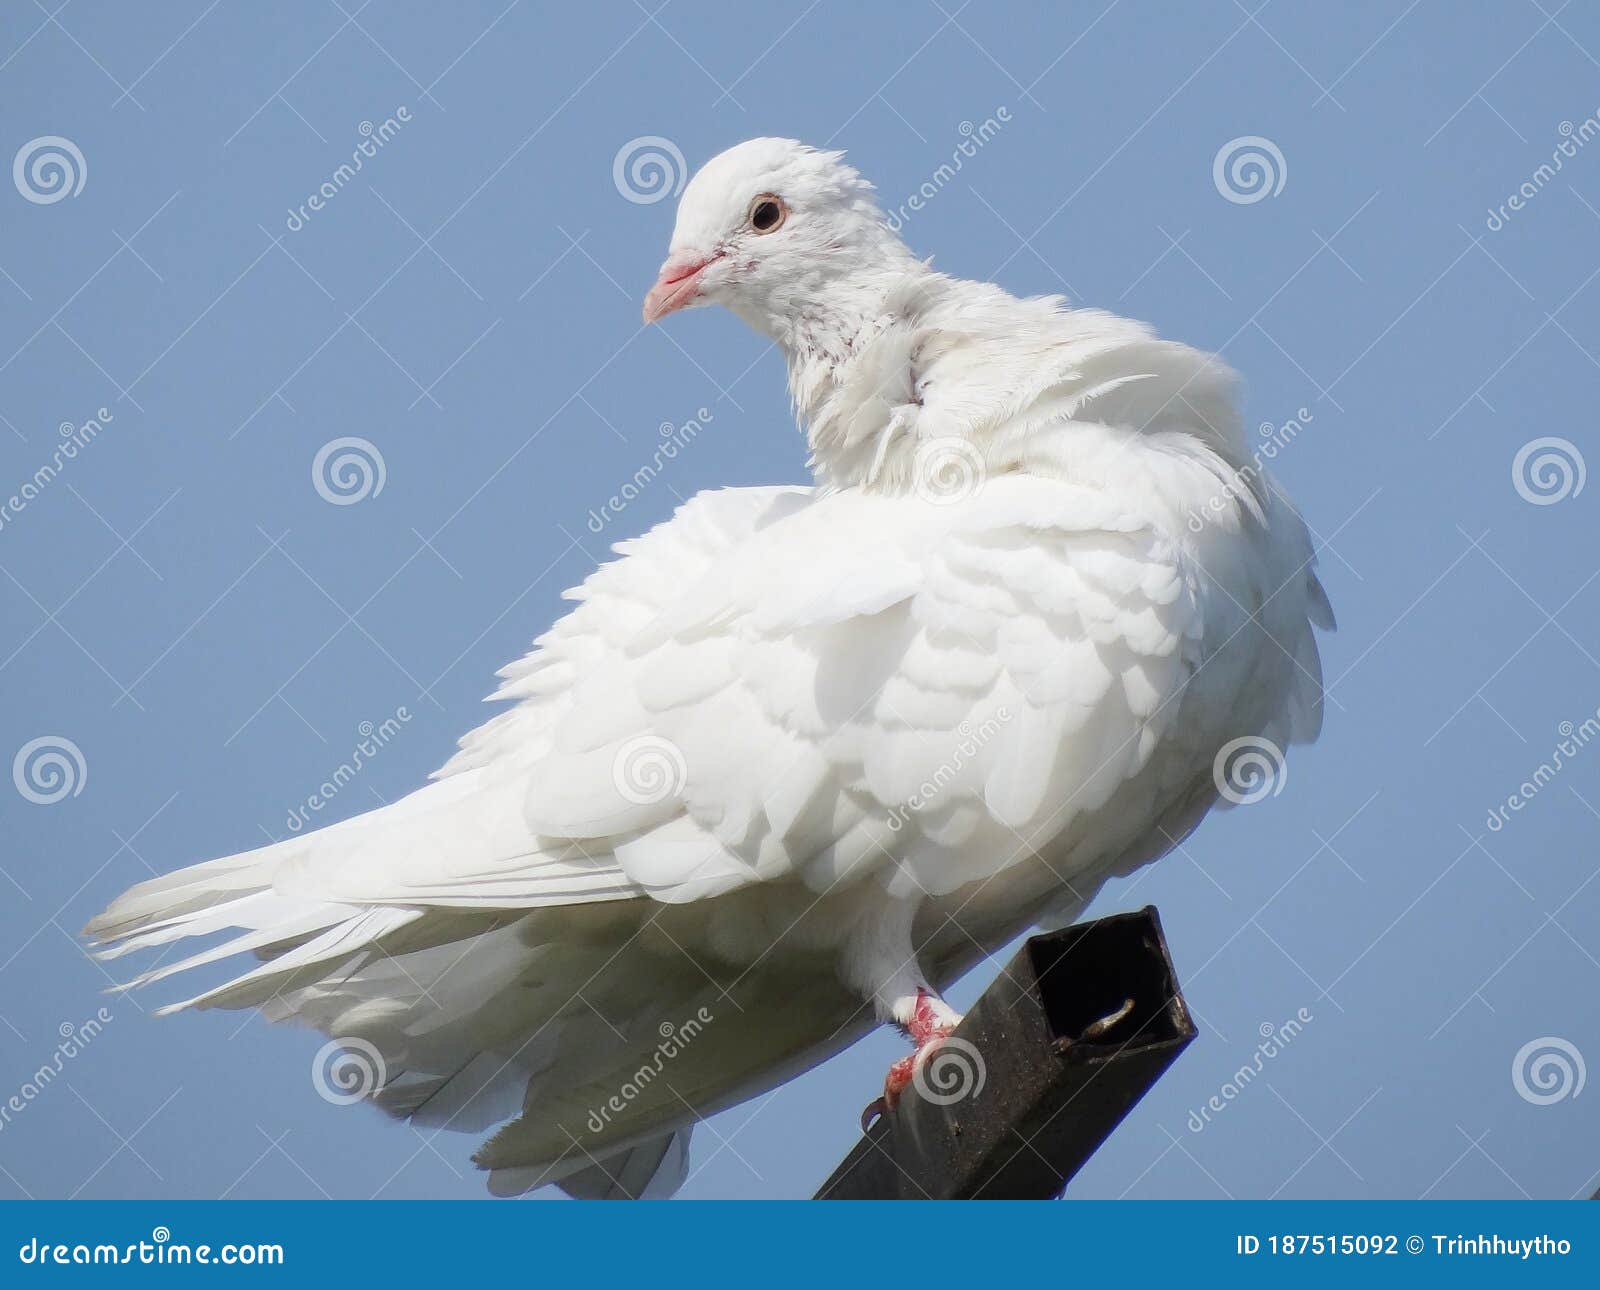 Bird in the daily life stock photo. Image of feathers - 187515092